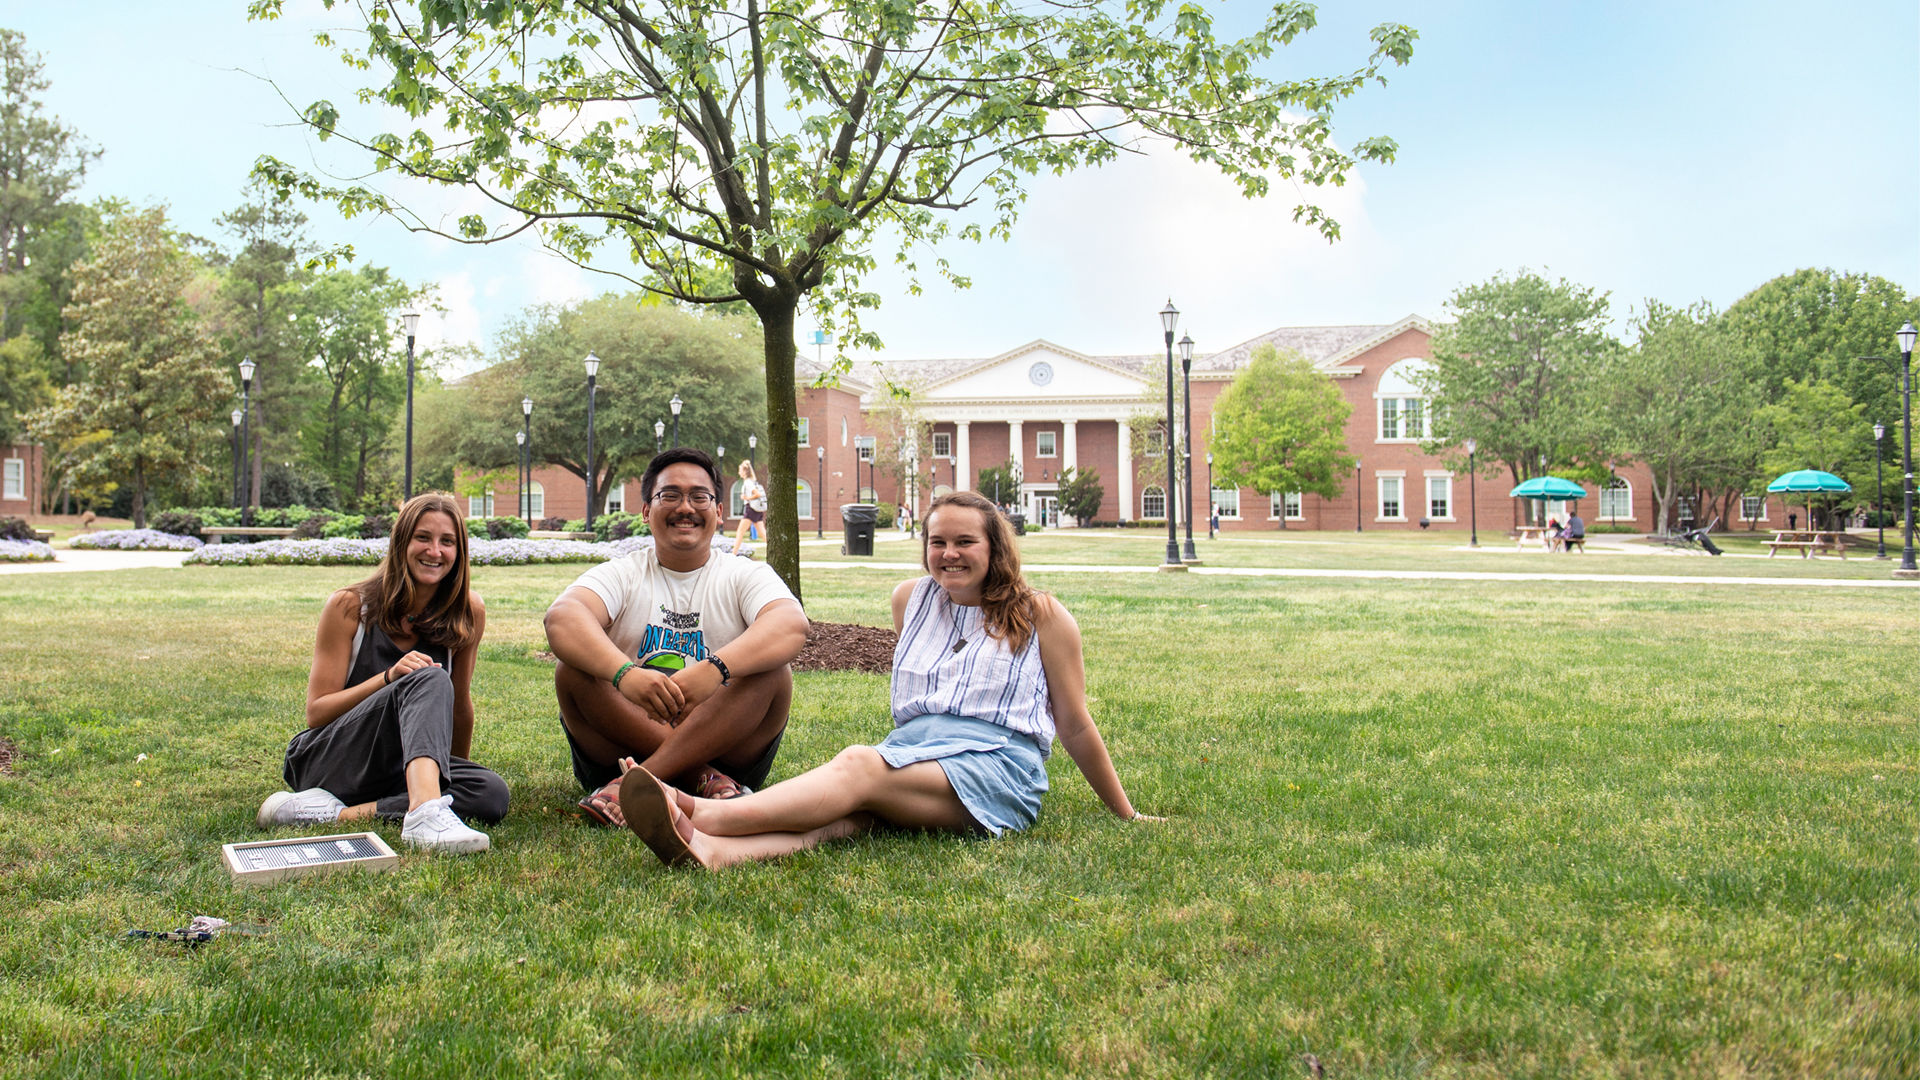 Three students site in the green grass on Prince Lawn, smiling while facing the camera with Edwards Building behind them.